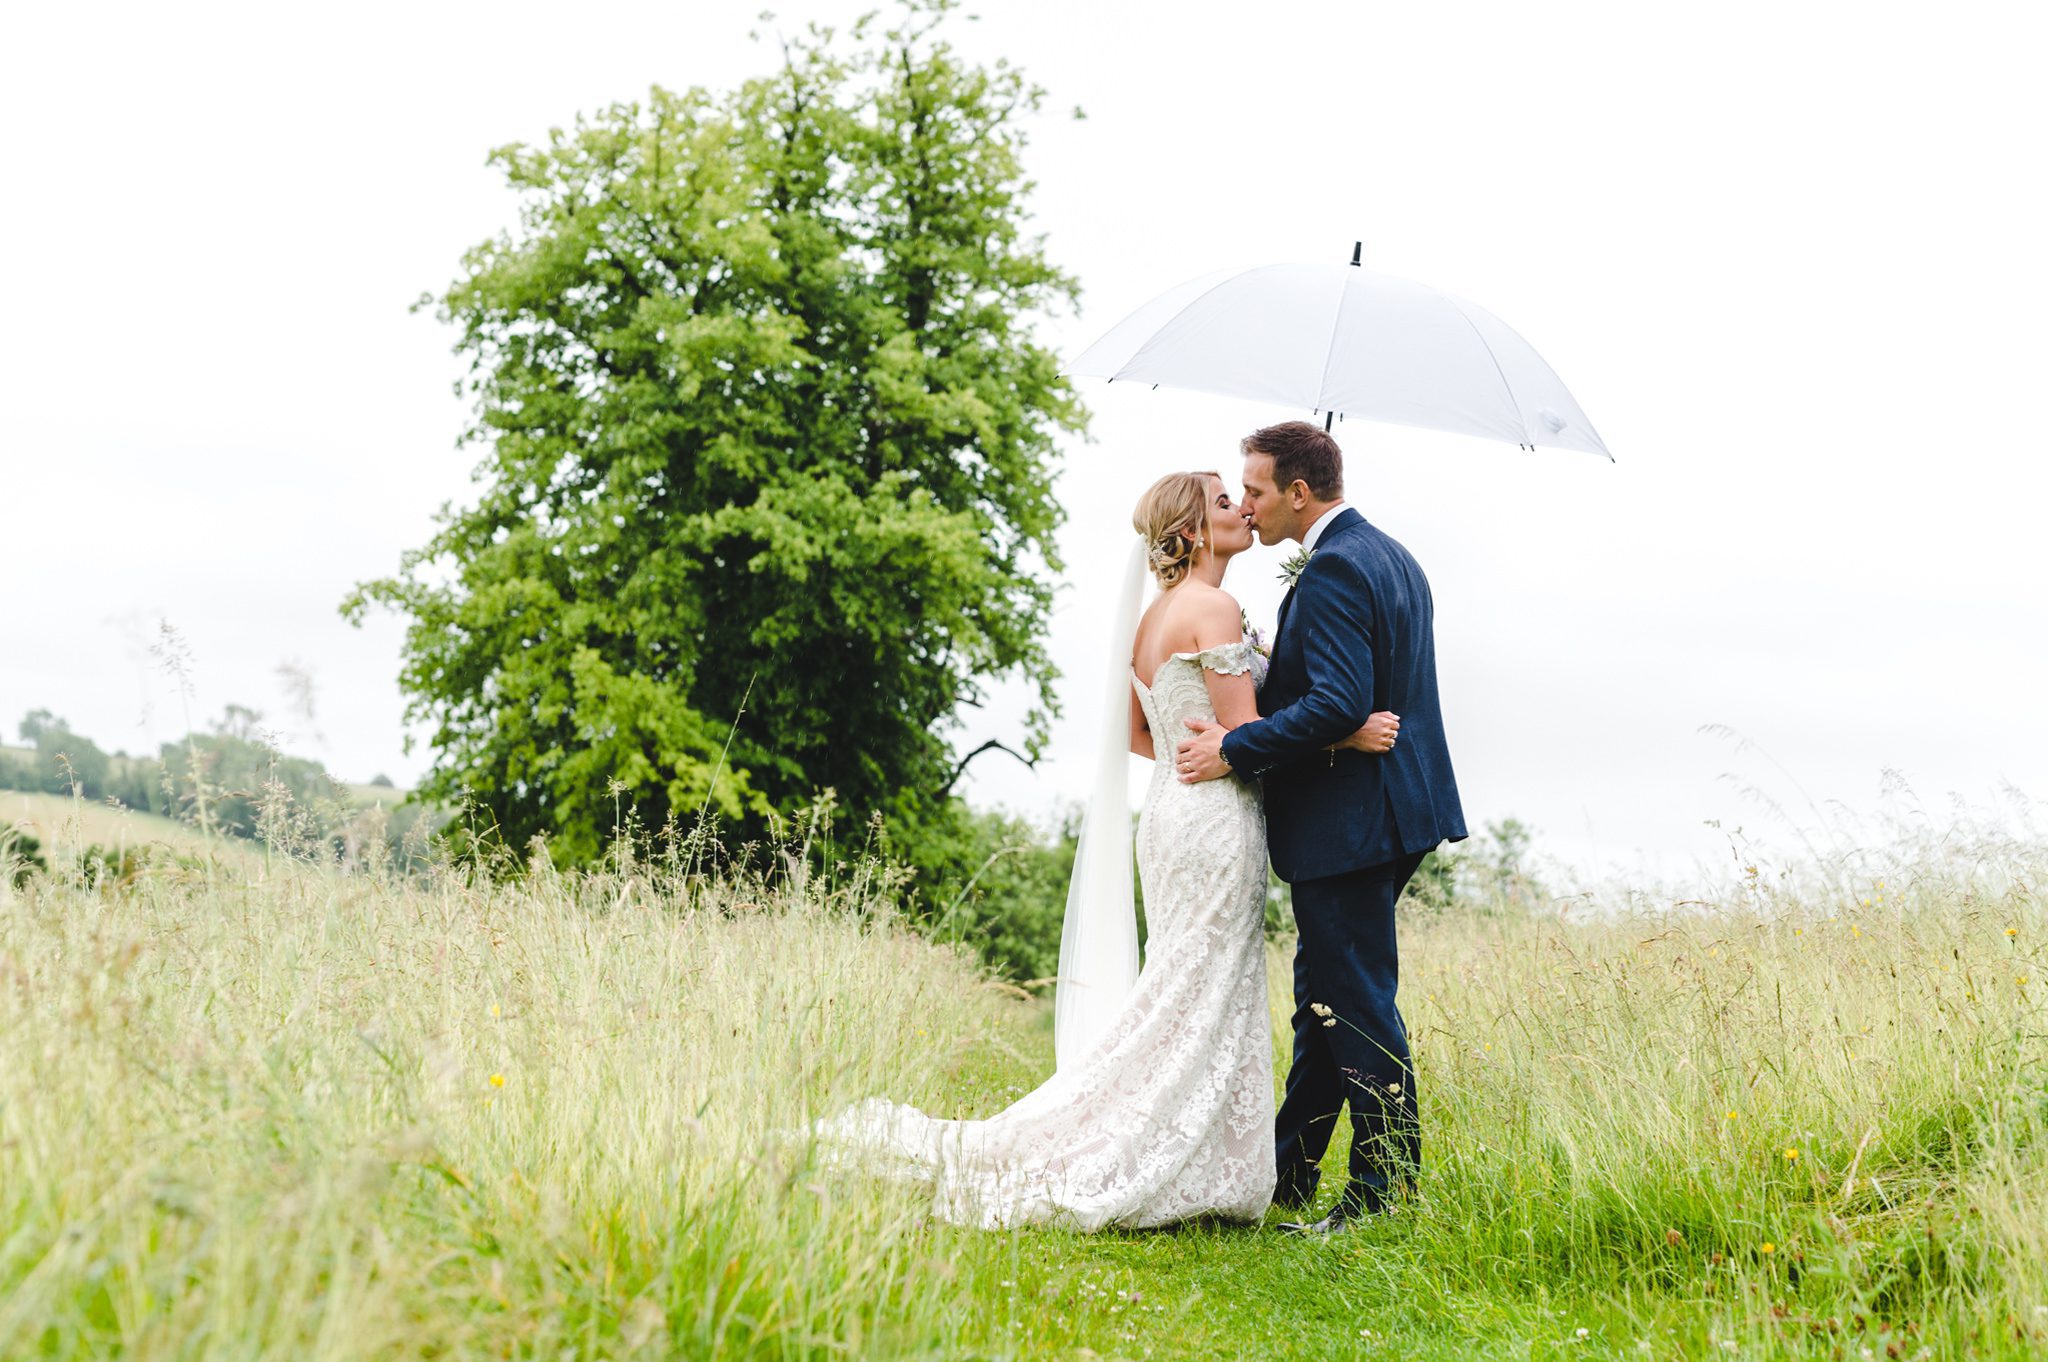 A bride and groom standing under an umbrella